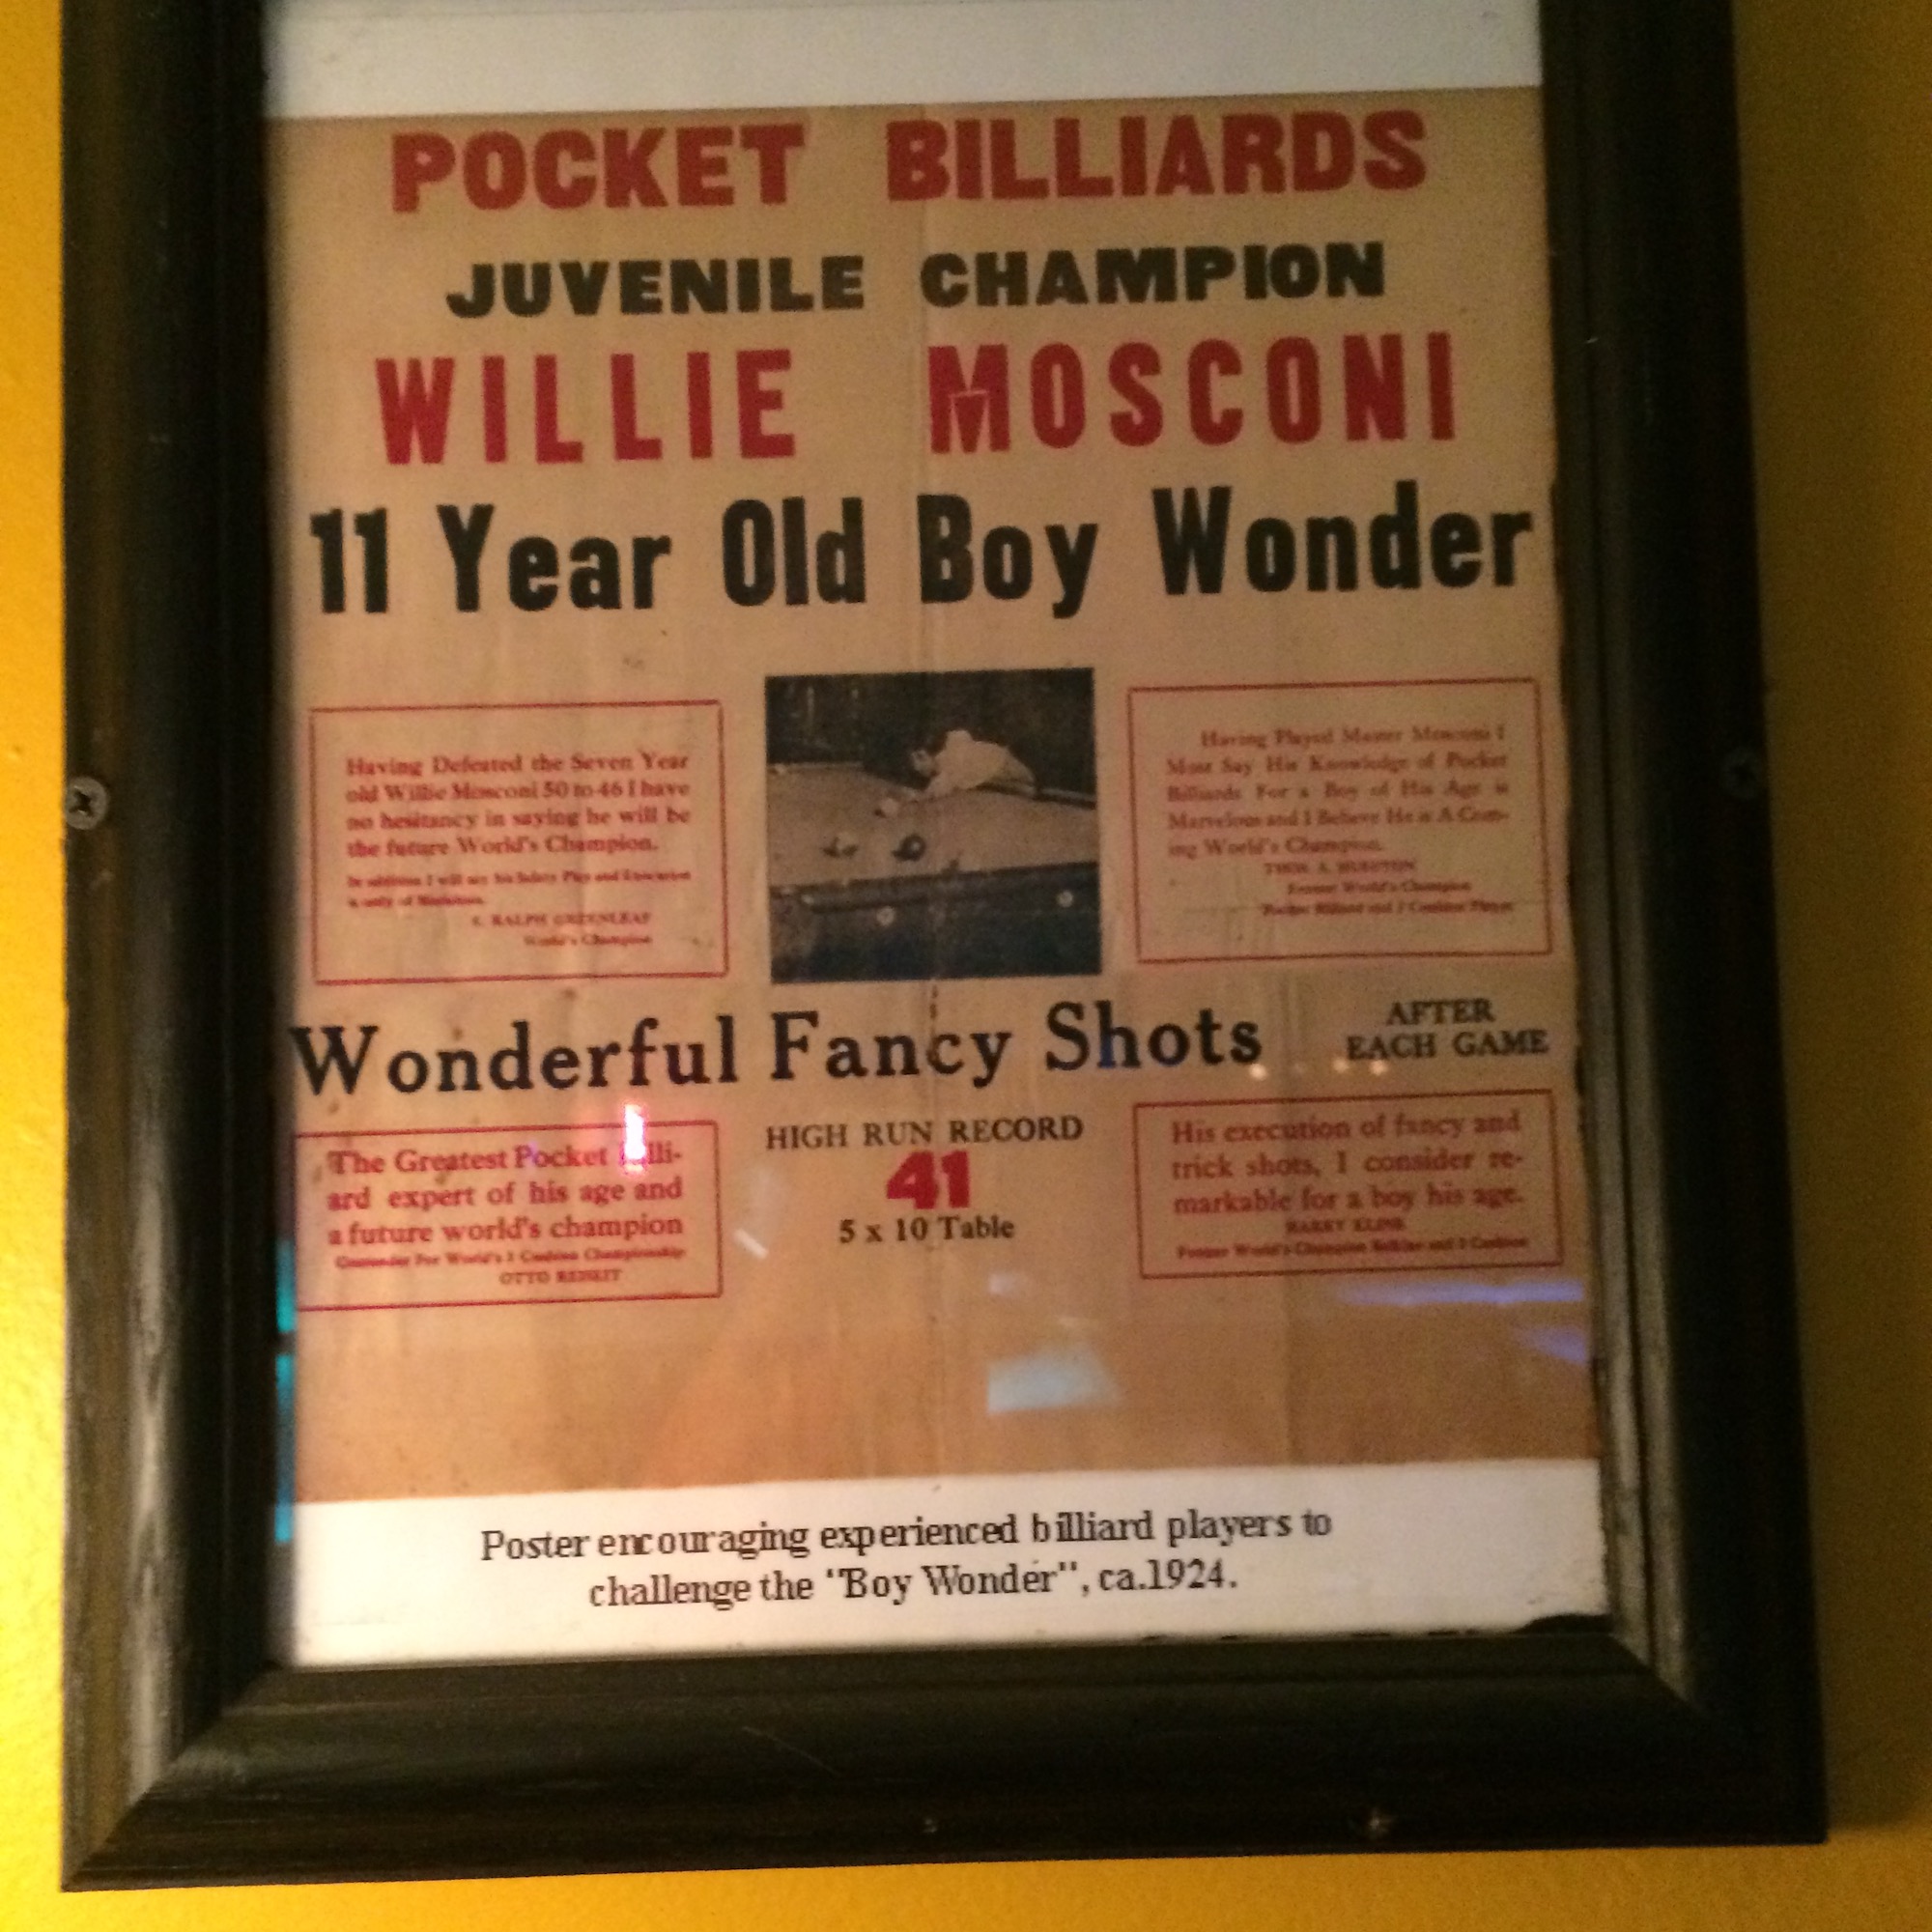 1924 Poster of 11 year old boy wonder Willie Mosconi